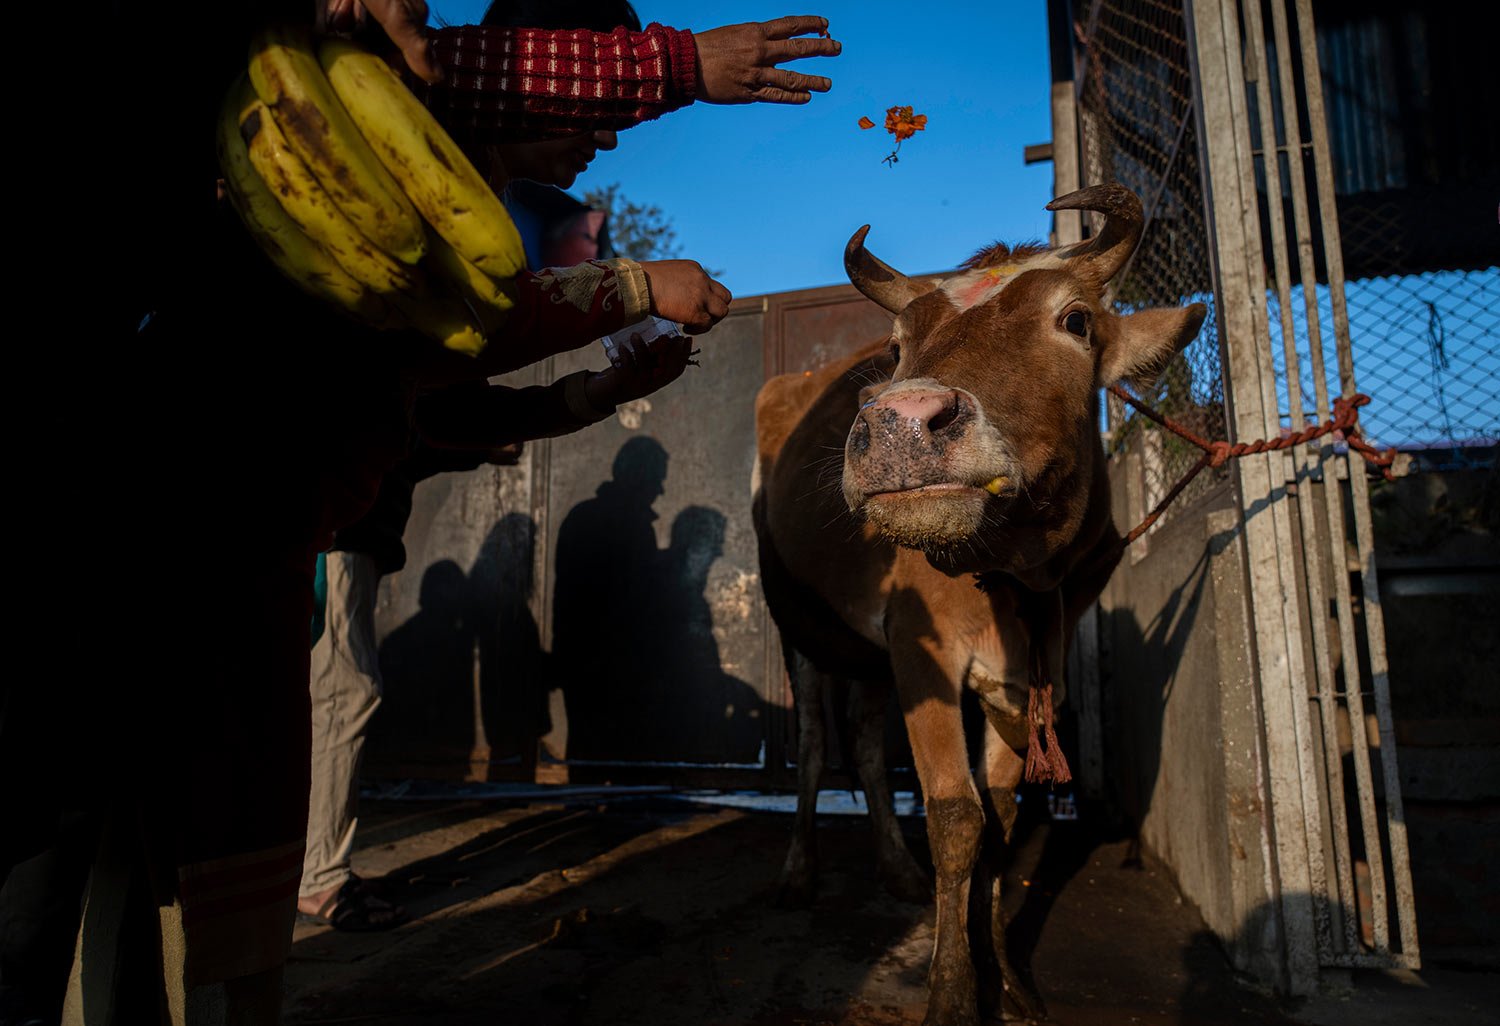  Devotees perform rituals at a center where abandoned cows and bulls are sheltered as they worship cows during Gai Tihar, or cow festival, in Kathmandu, Nepal, Monday, Nov. 13, 2023.  (AP Photo/Niranjan Shrestha) 